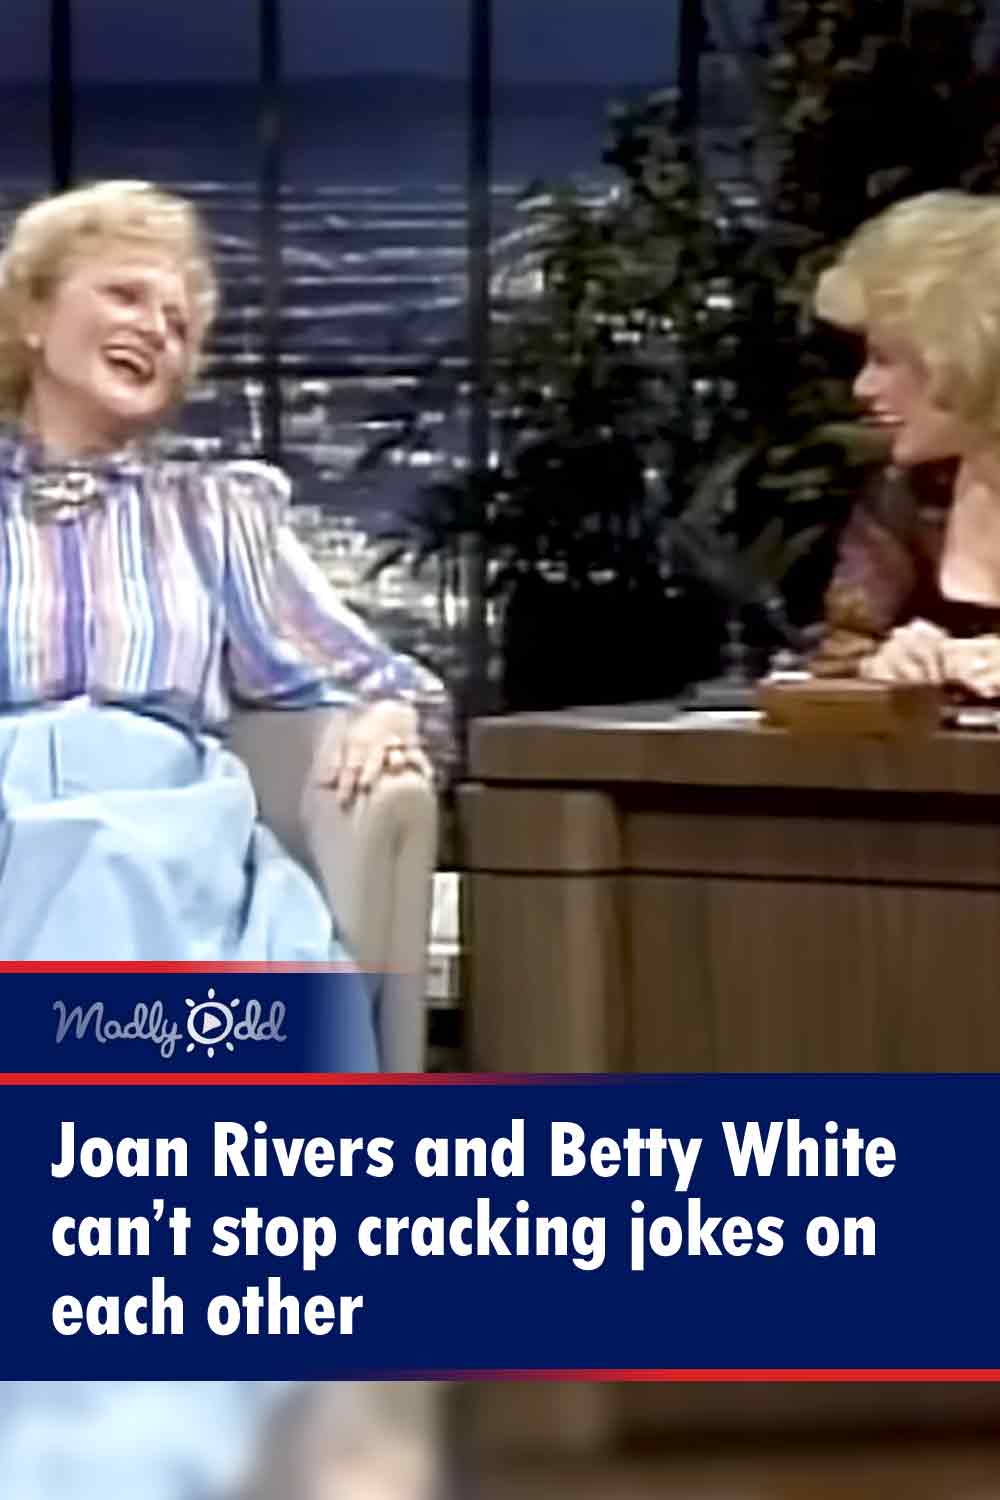 Joan Rivers and Betty White can’t stop cracking jokes on each other